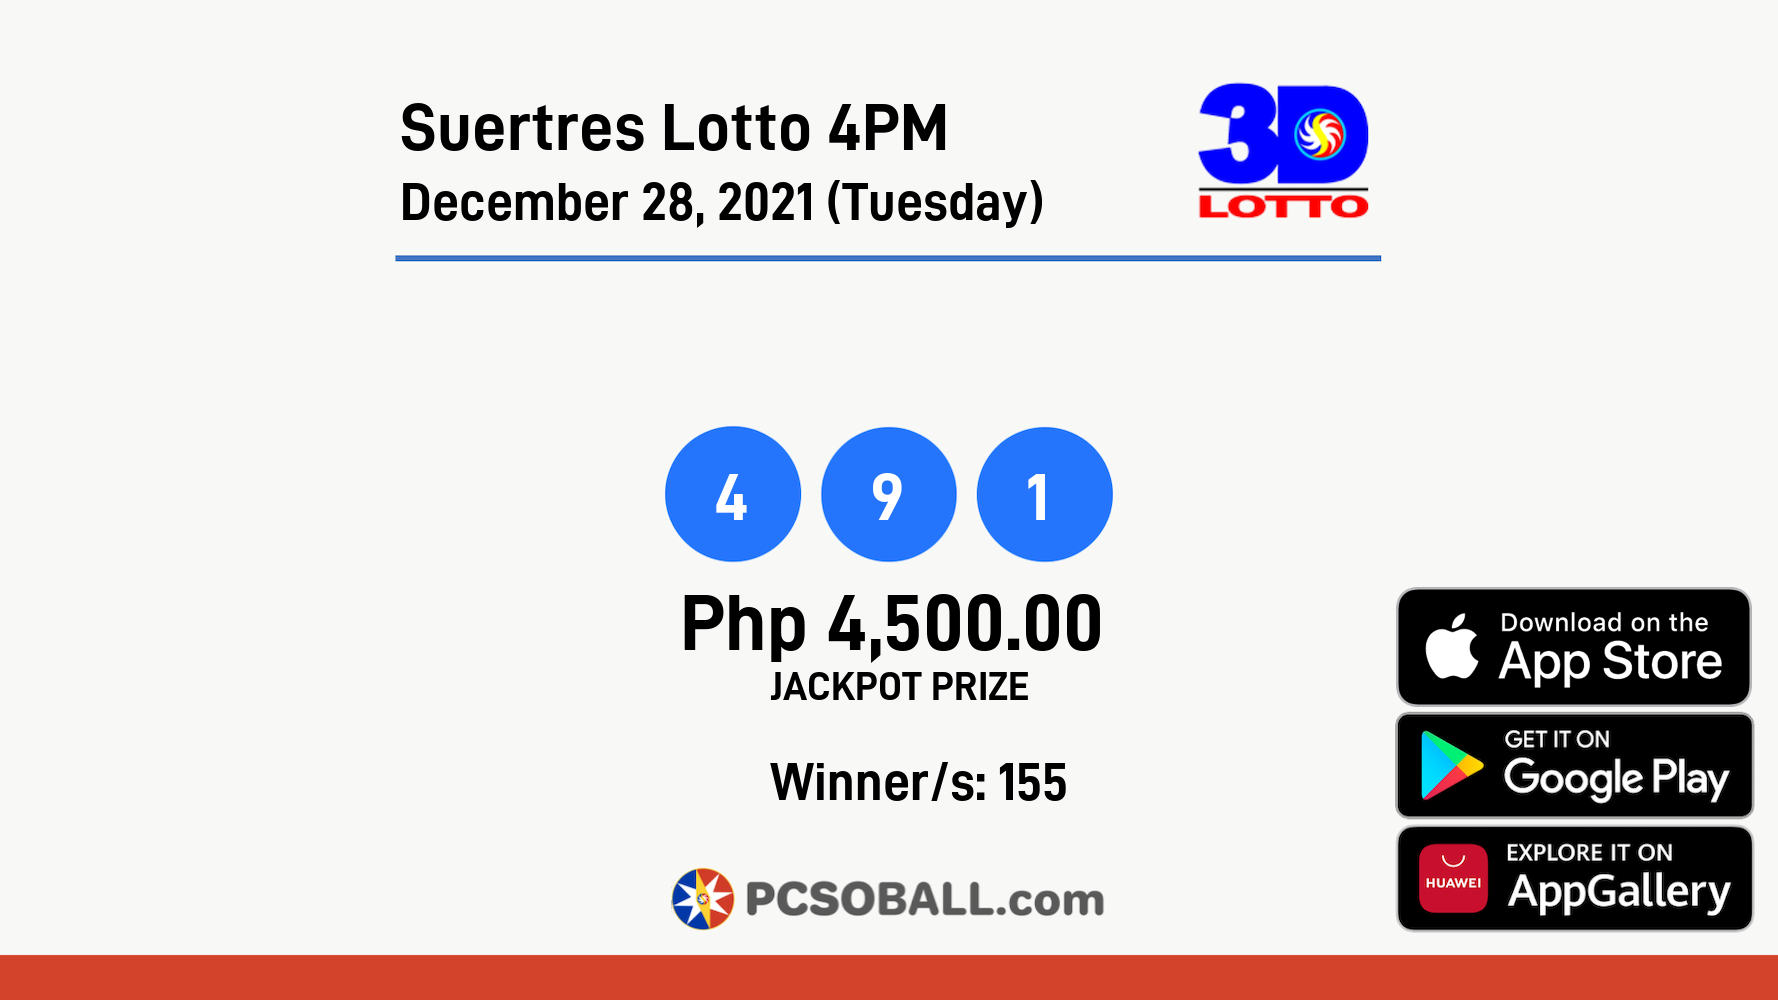 Suertres Lotto 4PM December 28, 2021 (Tuesday) Result